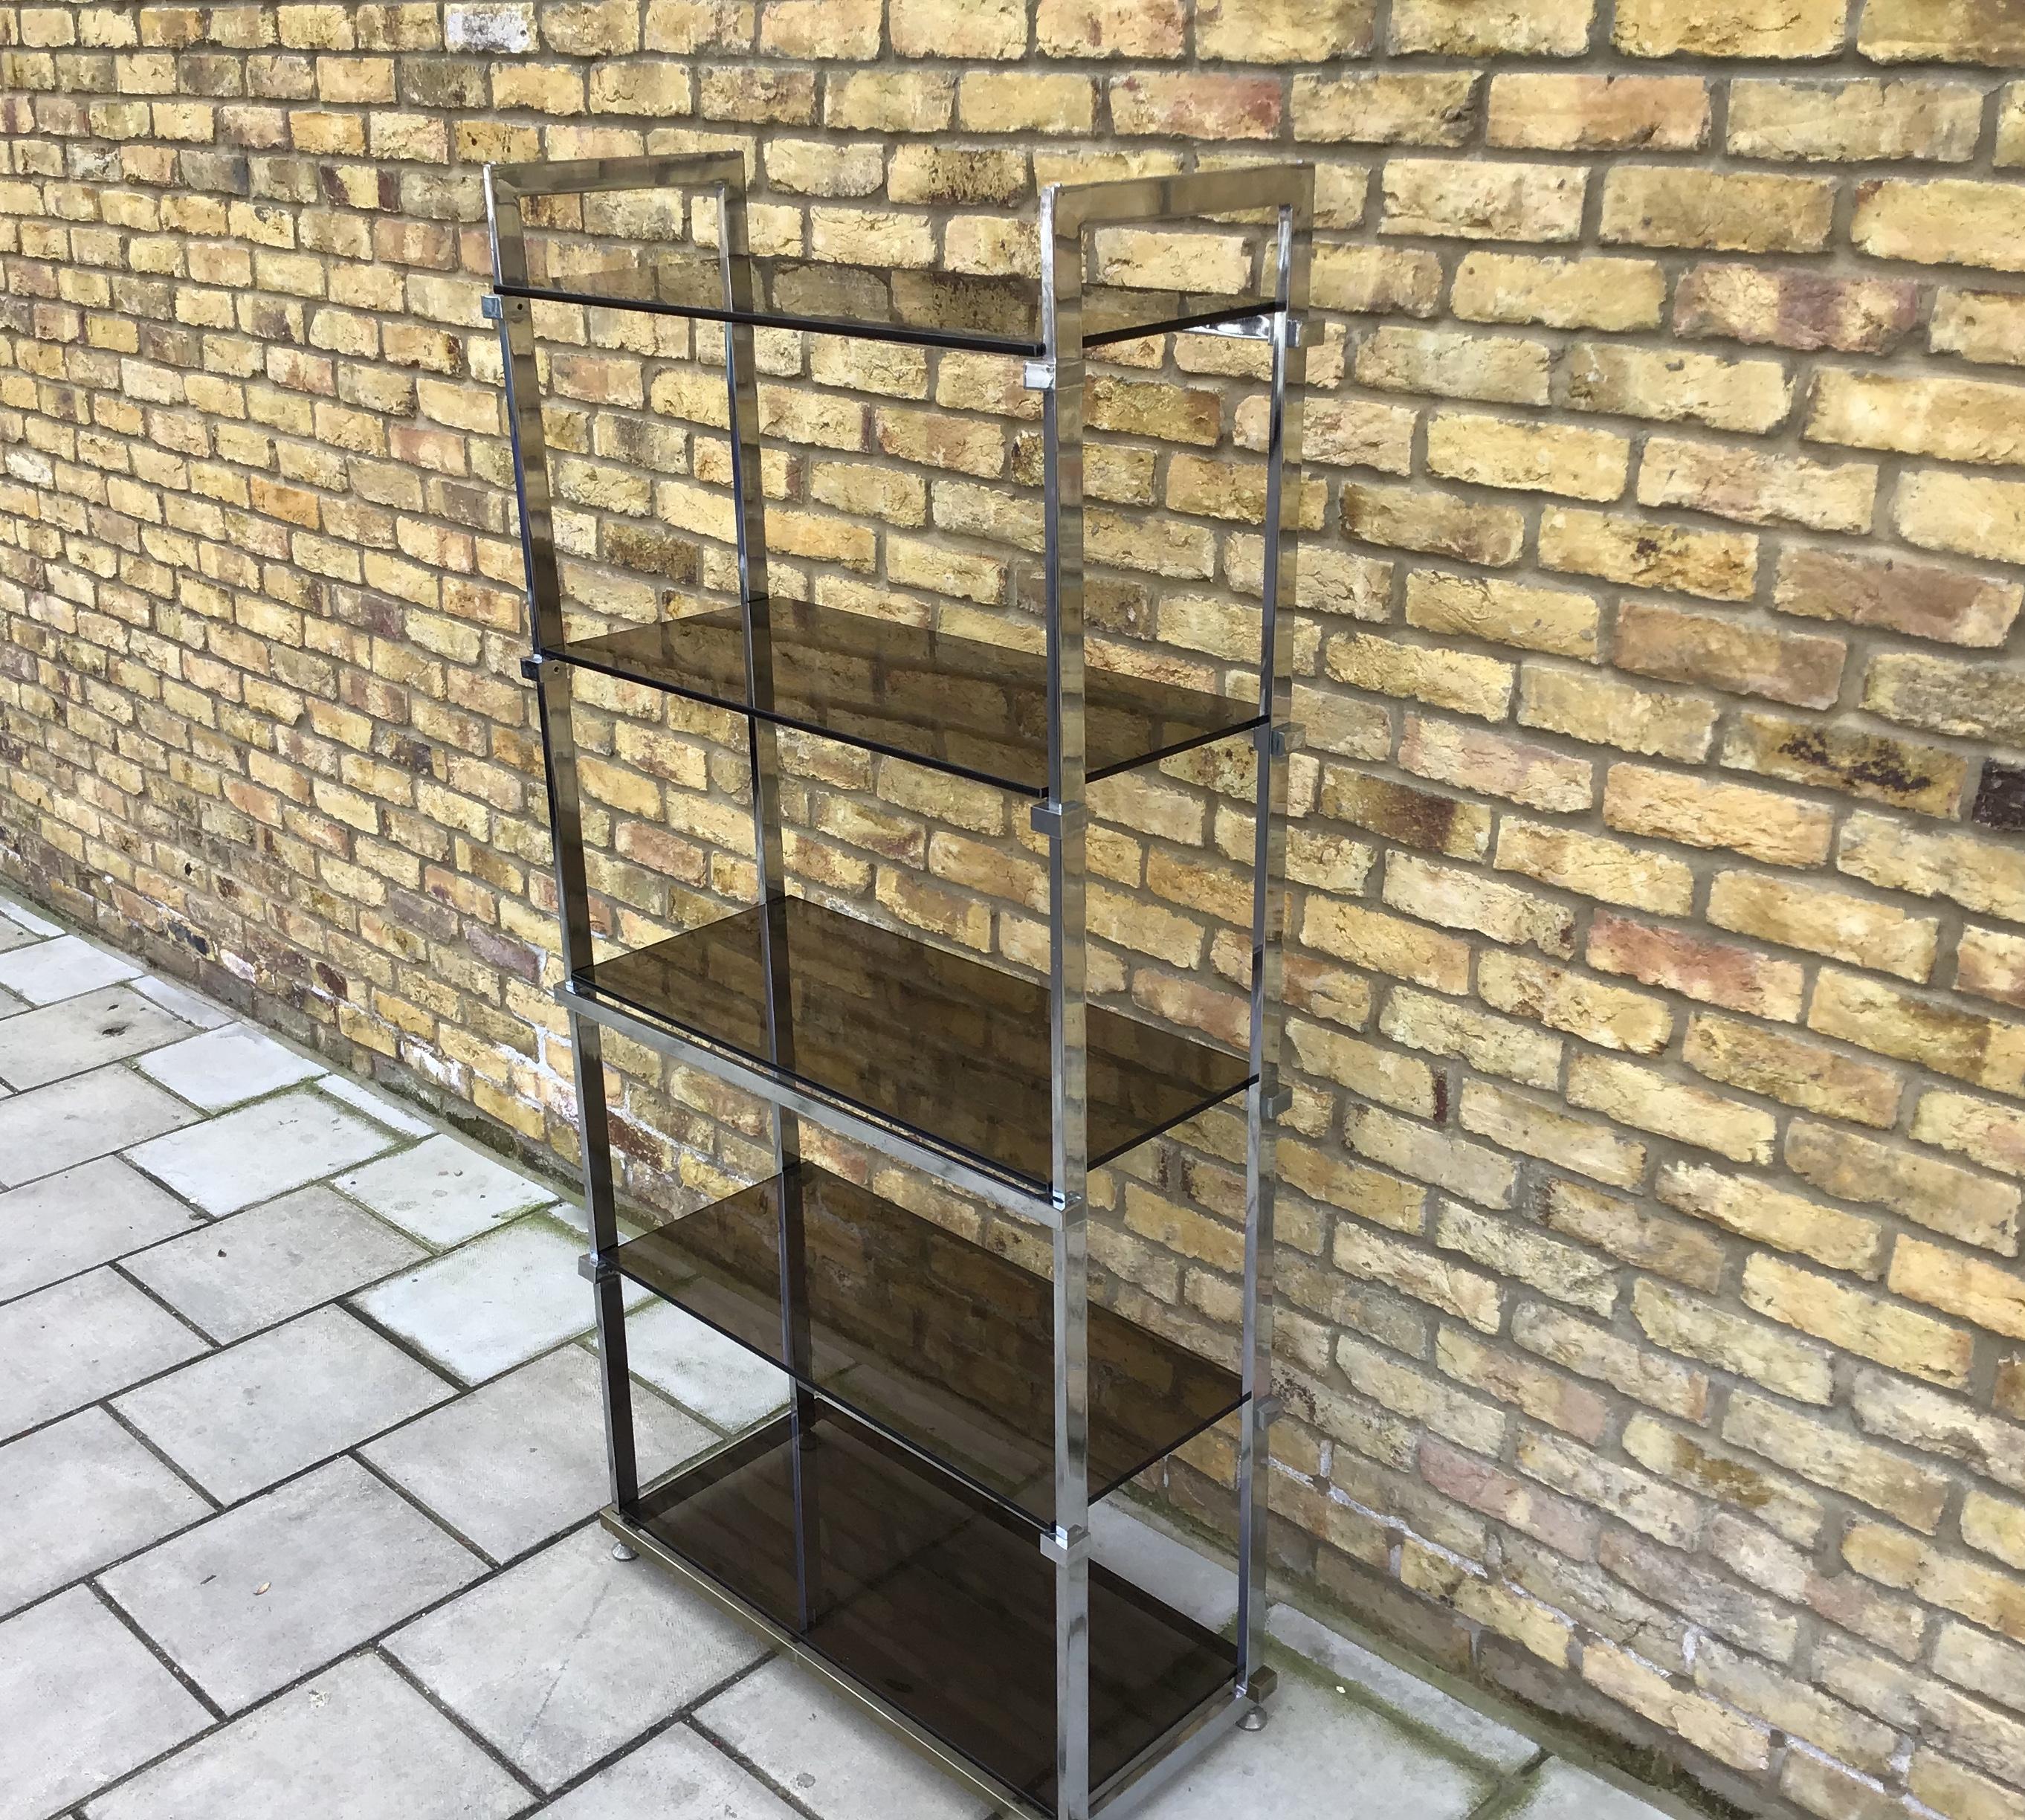 Tinted glass with adjustable supports chrome plated and adjusting feet
Large 1970s shelving in a simple clean design. Cc Pieff.